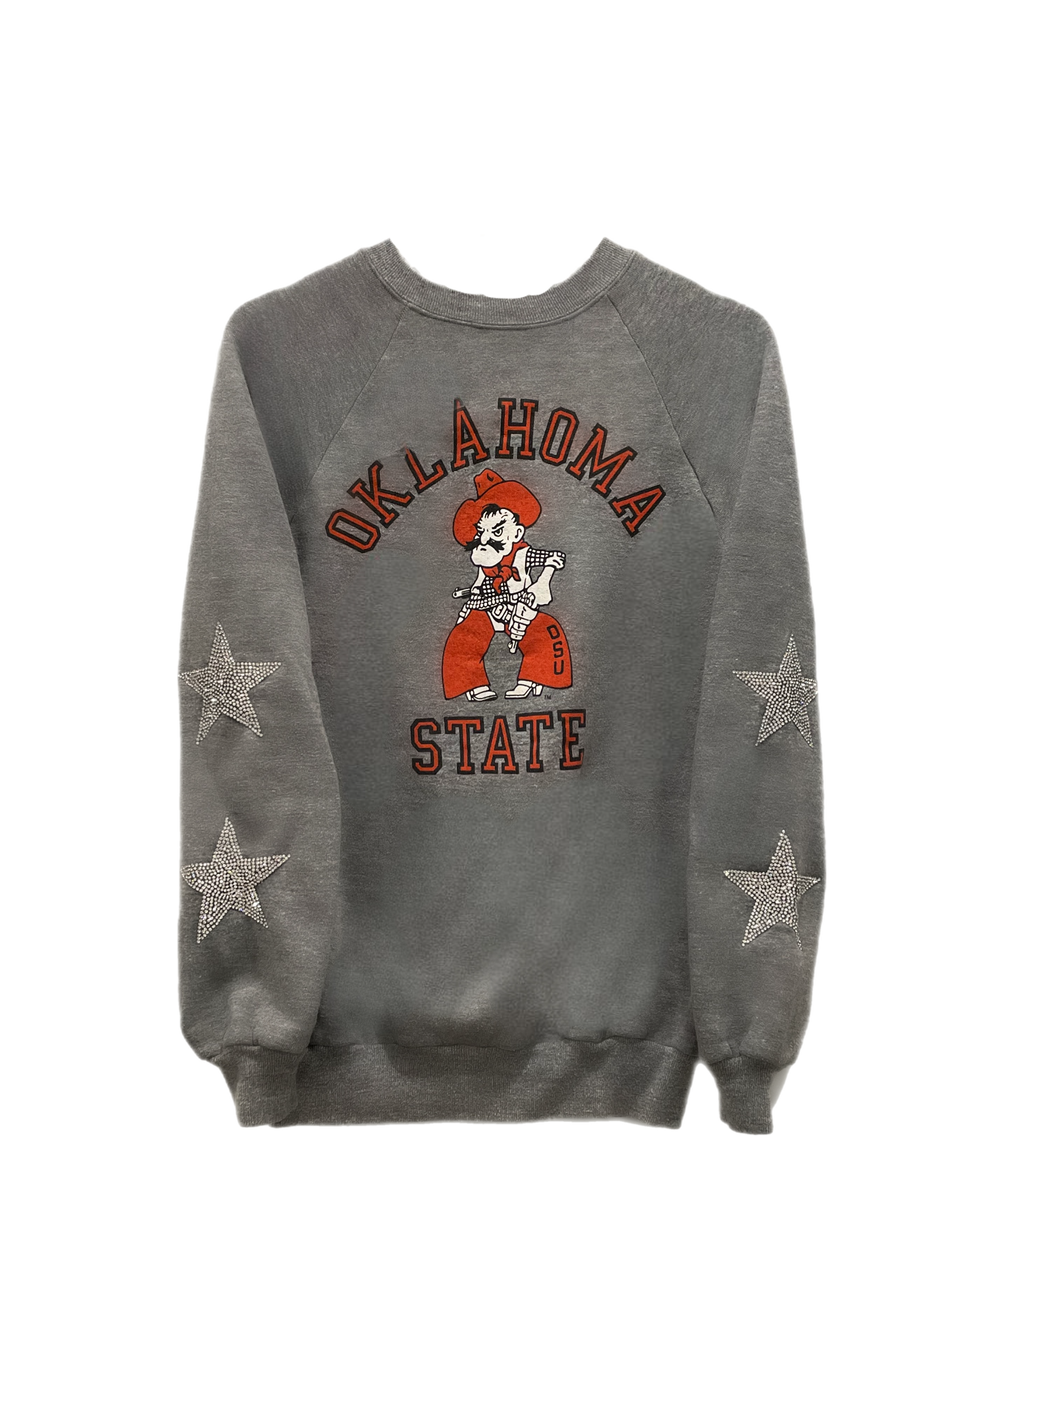 Oklahoma State University, One of a KIND Vintage Sweatshirt with Crystal Star Design.